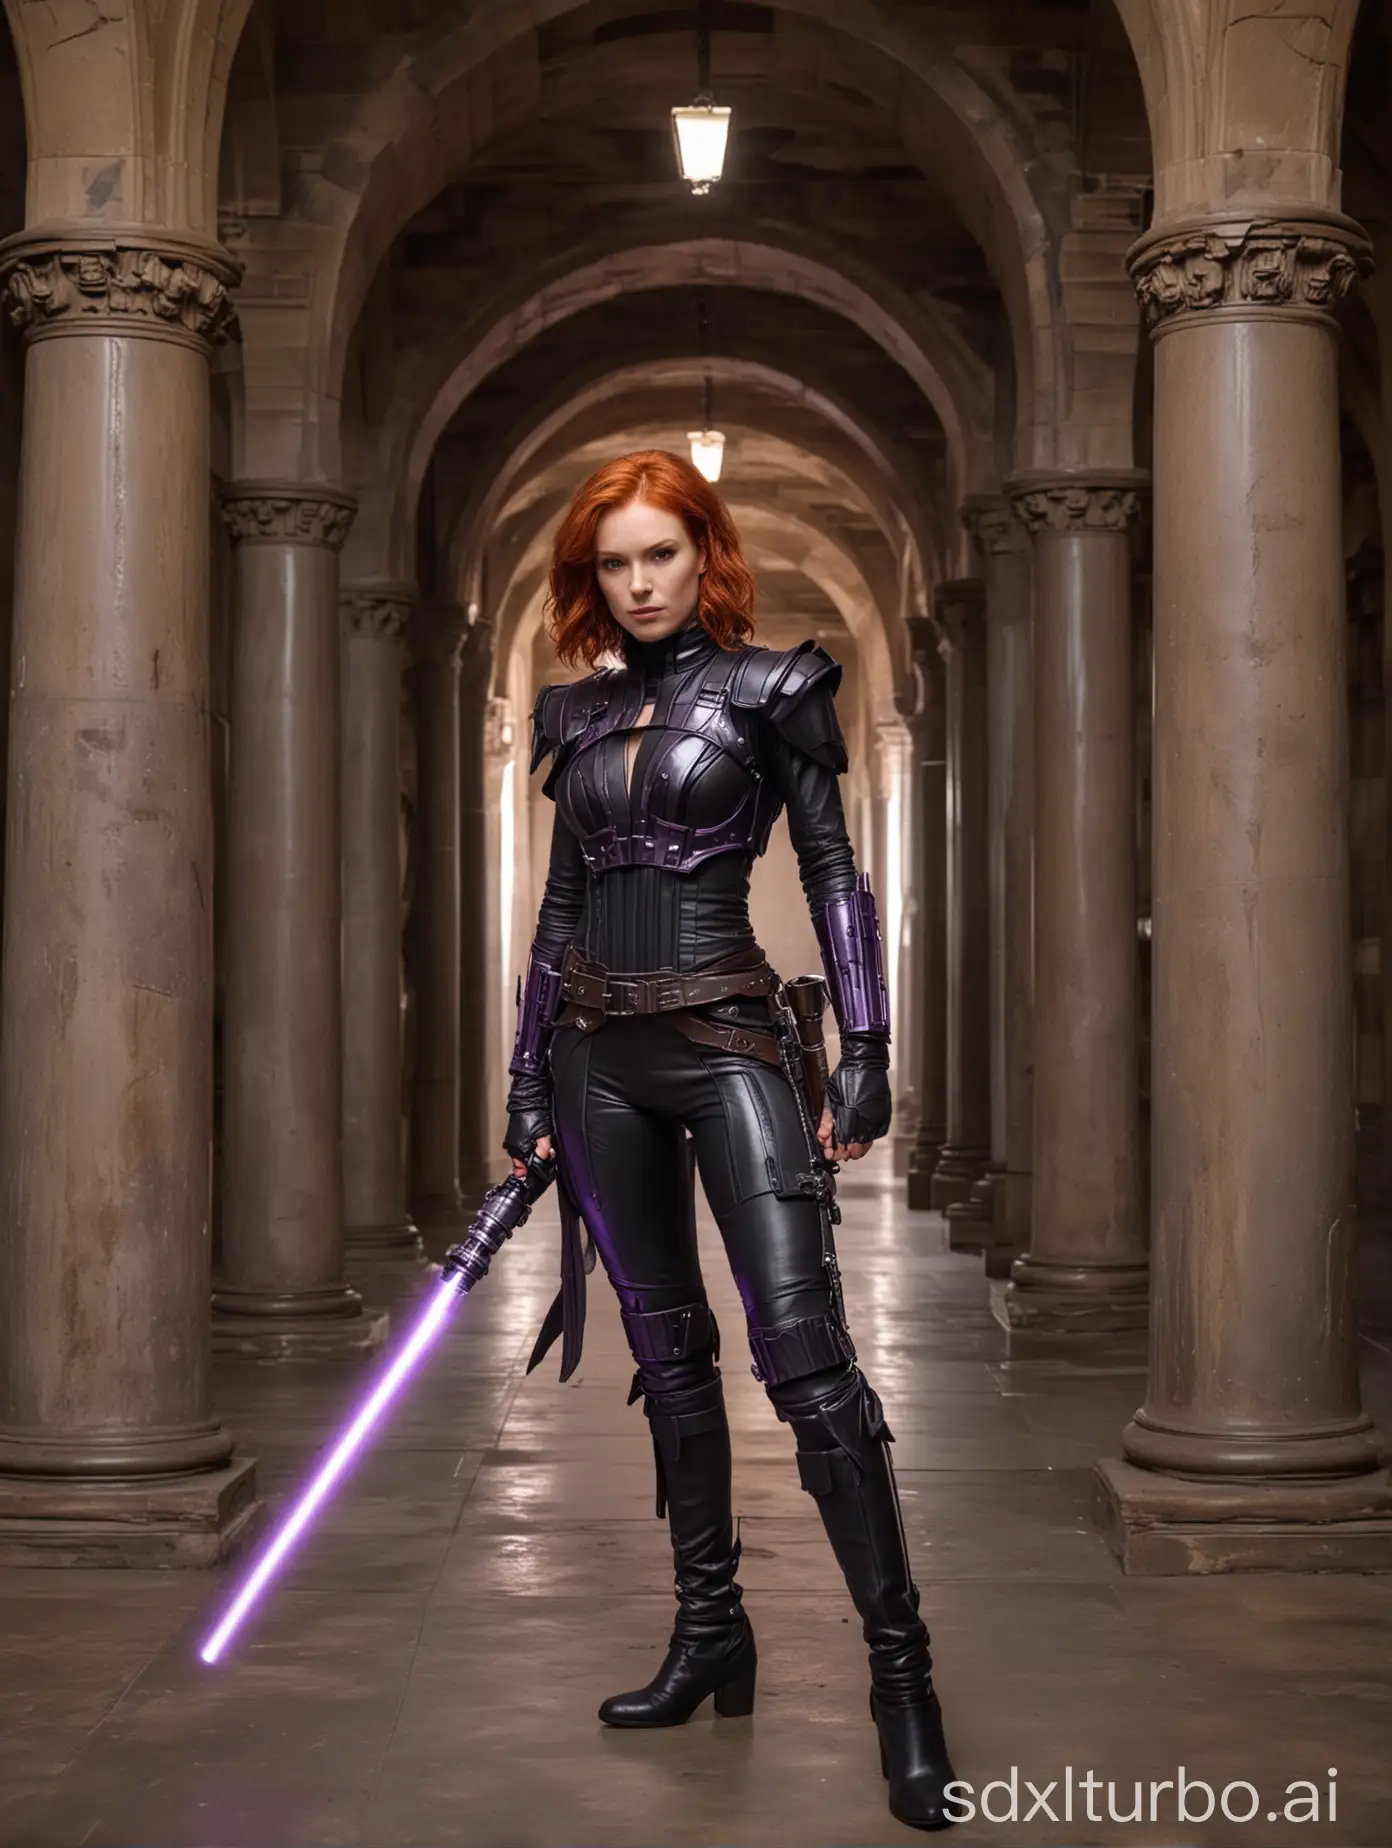 RedHaired-Woman-with-Purple-Lightsaber-in-Arched-Hallway